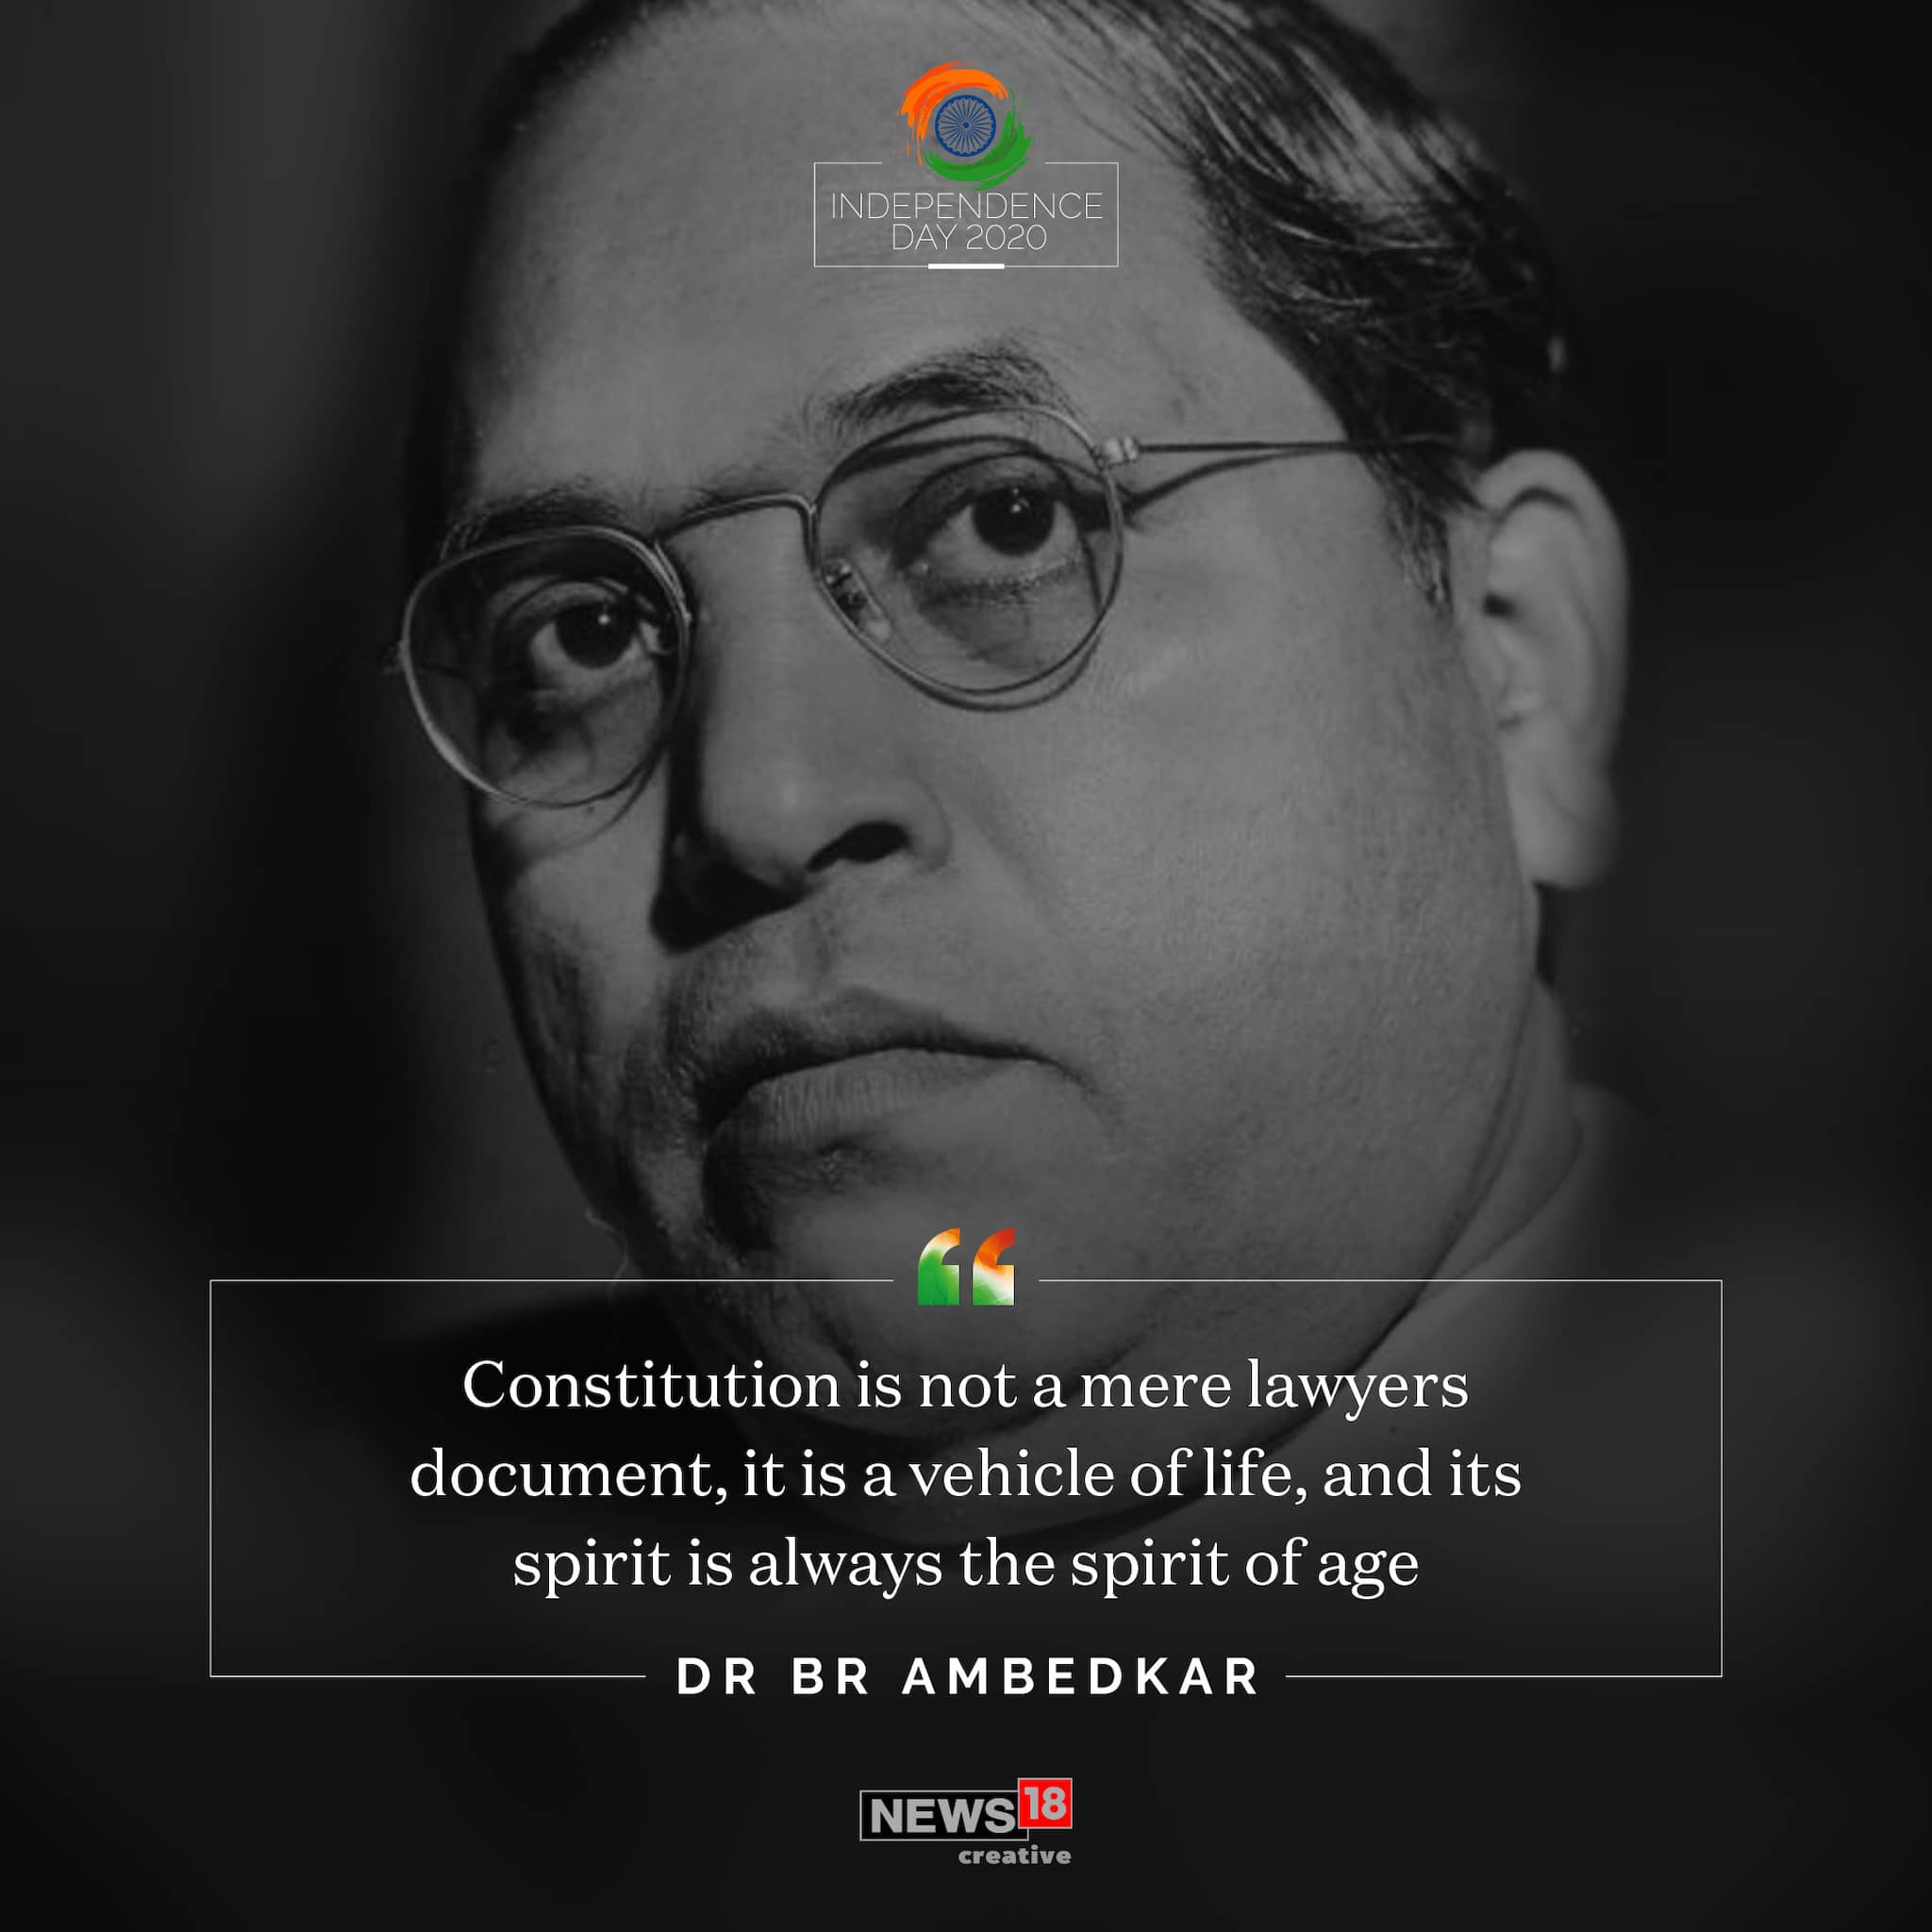 "Constitution is not a mere lawyers document, it is a vehicle of life, and its spirit is always the spirit of age" quote by Dr Babasaheb Ambedkar.